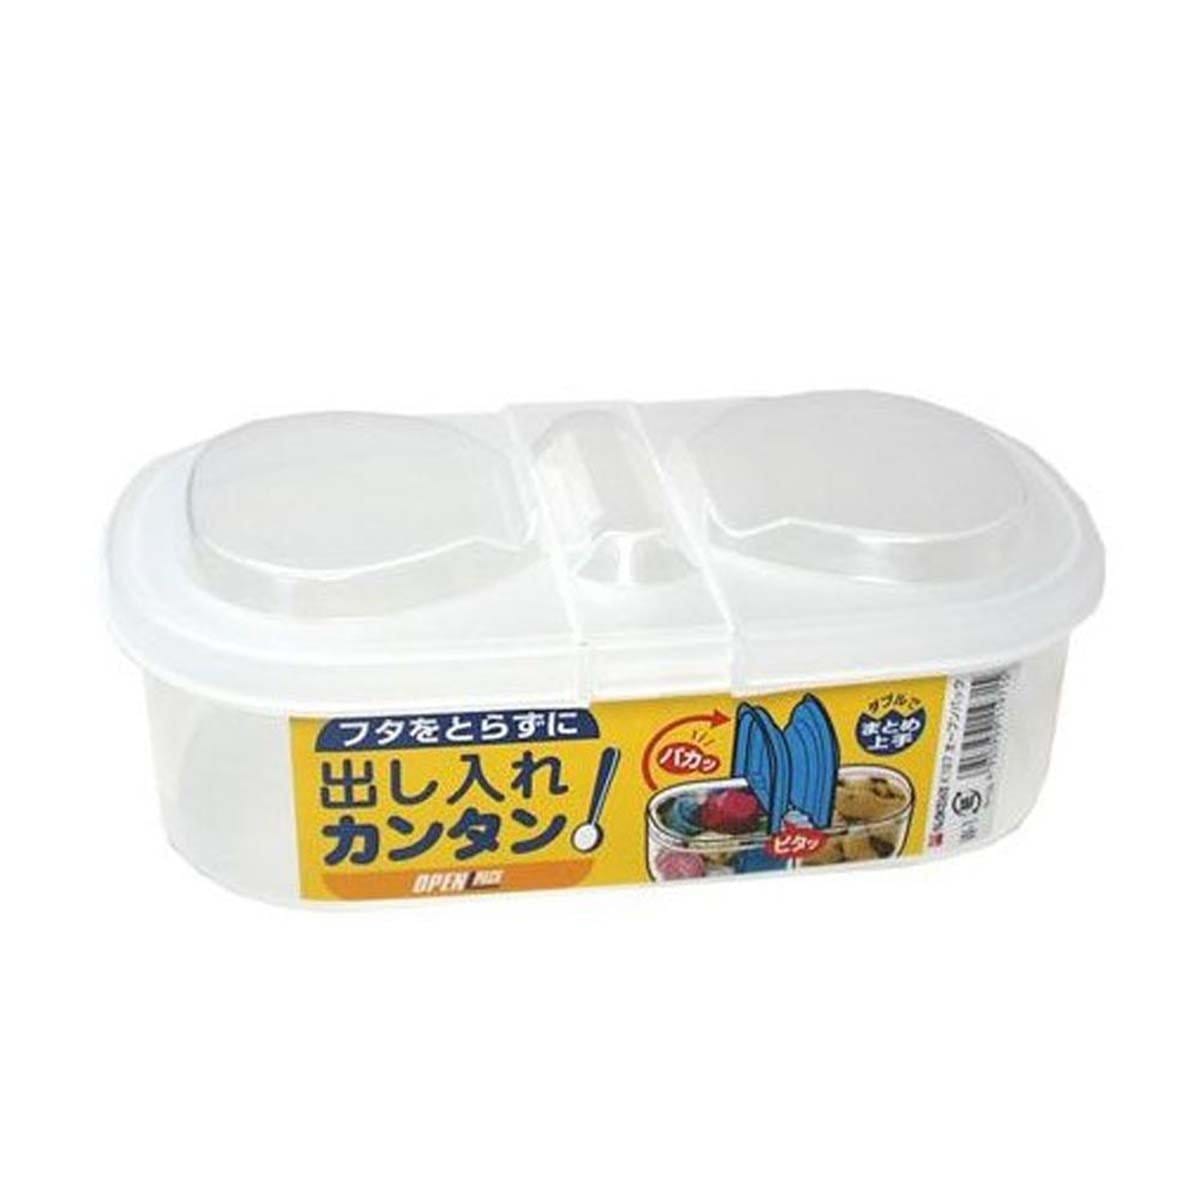 Japanese Plastic Food Storage Container Open Pack W 600ml